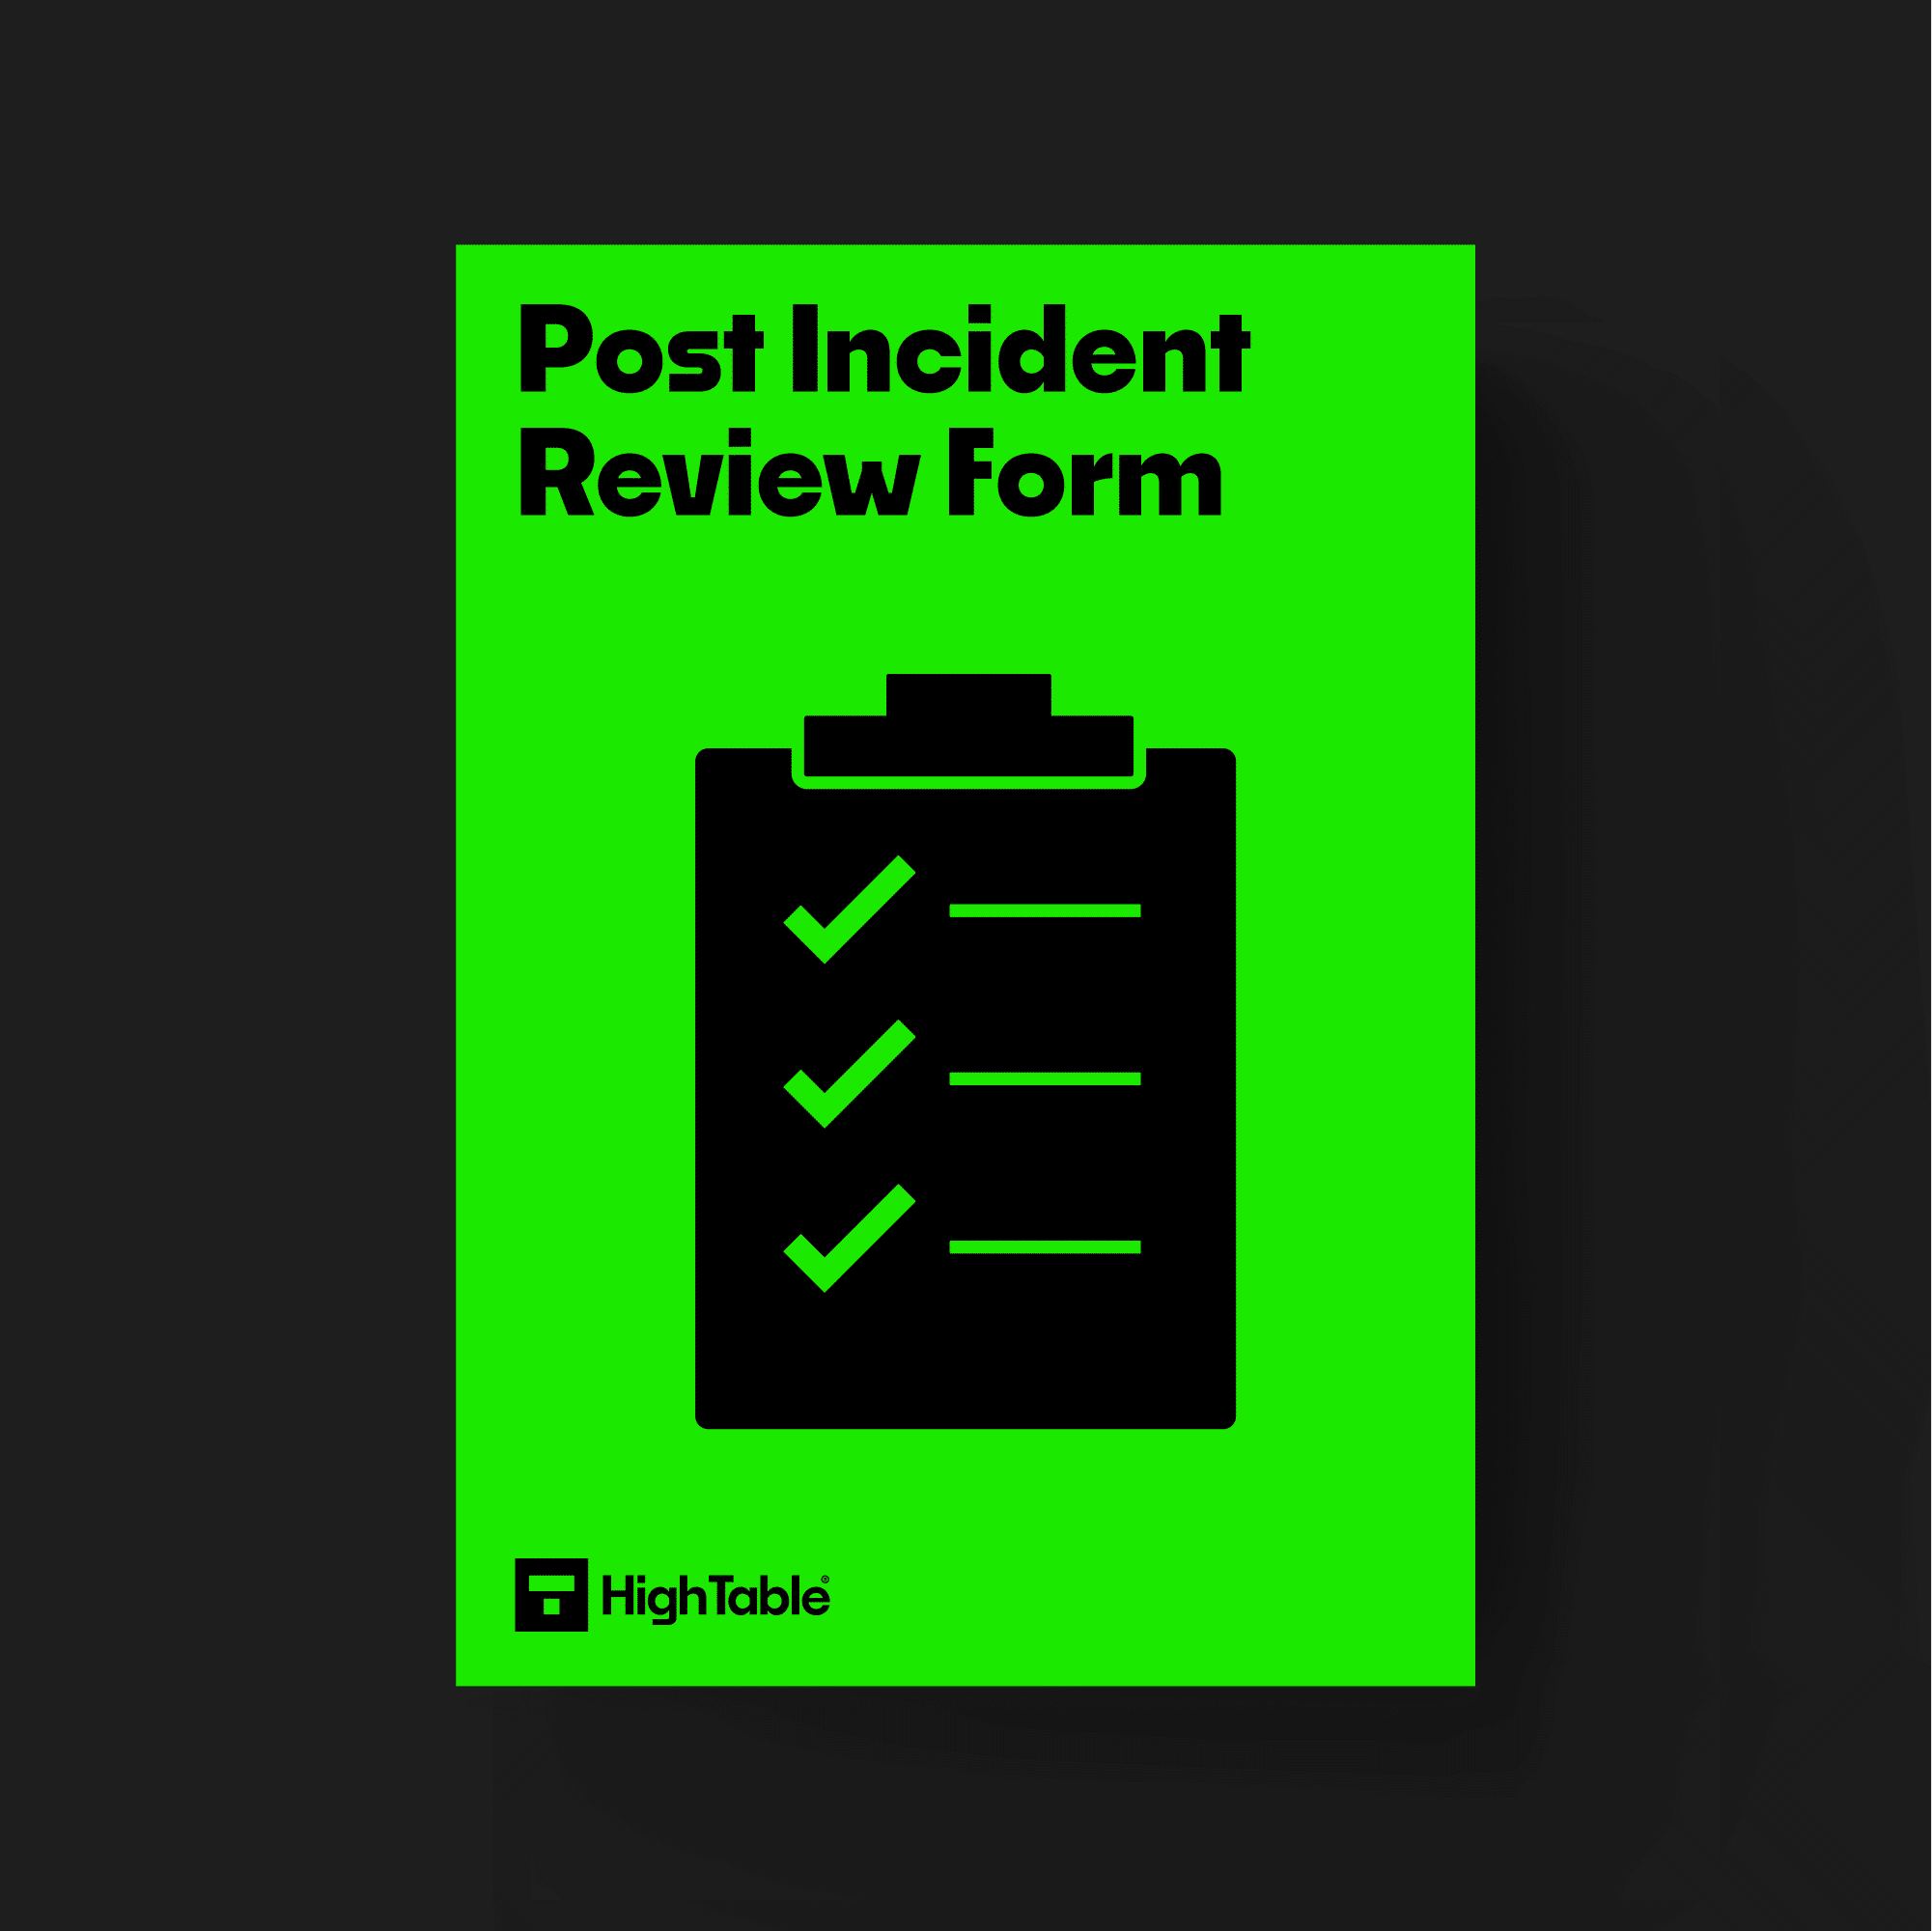 ISO 27001 Post Incident Review Form Template